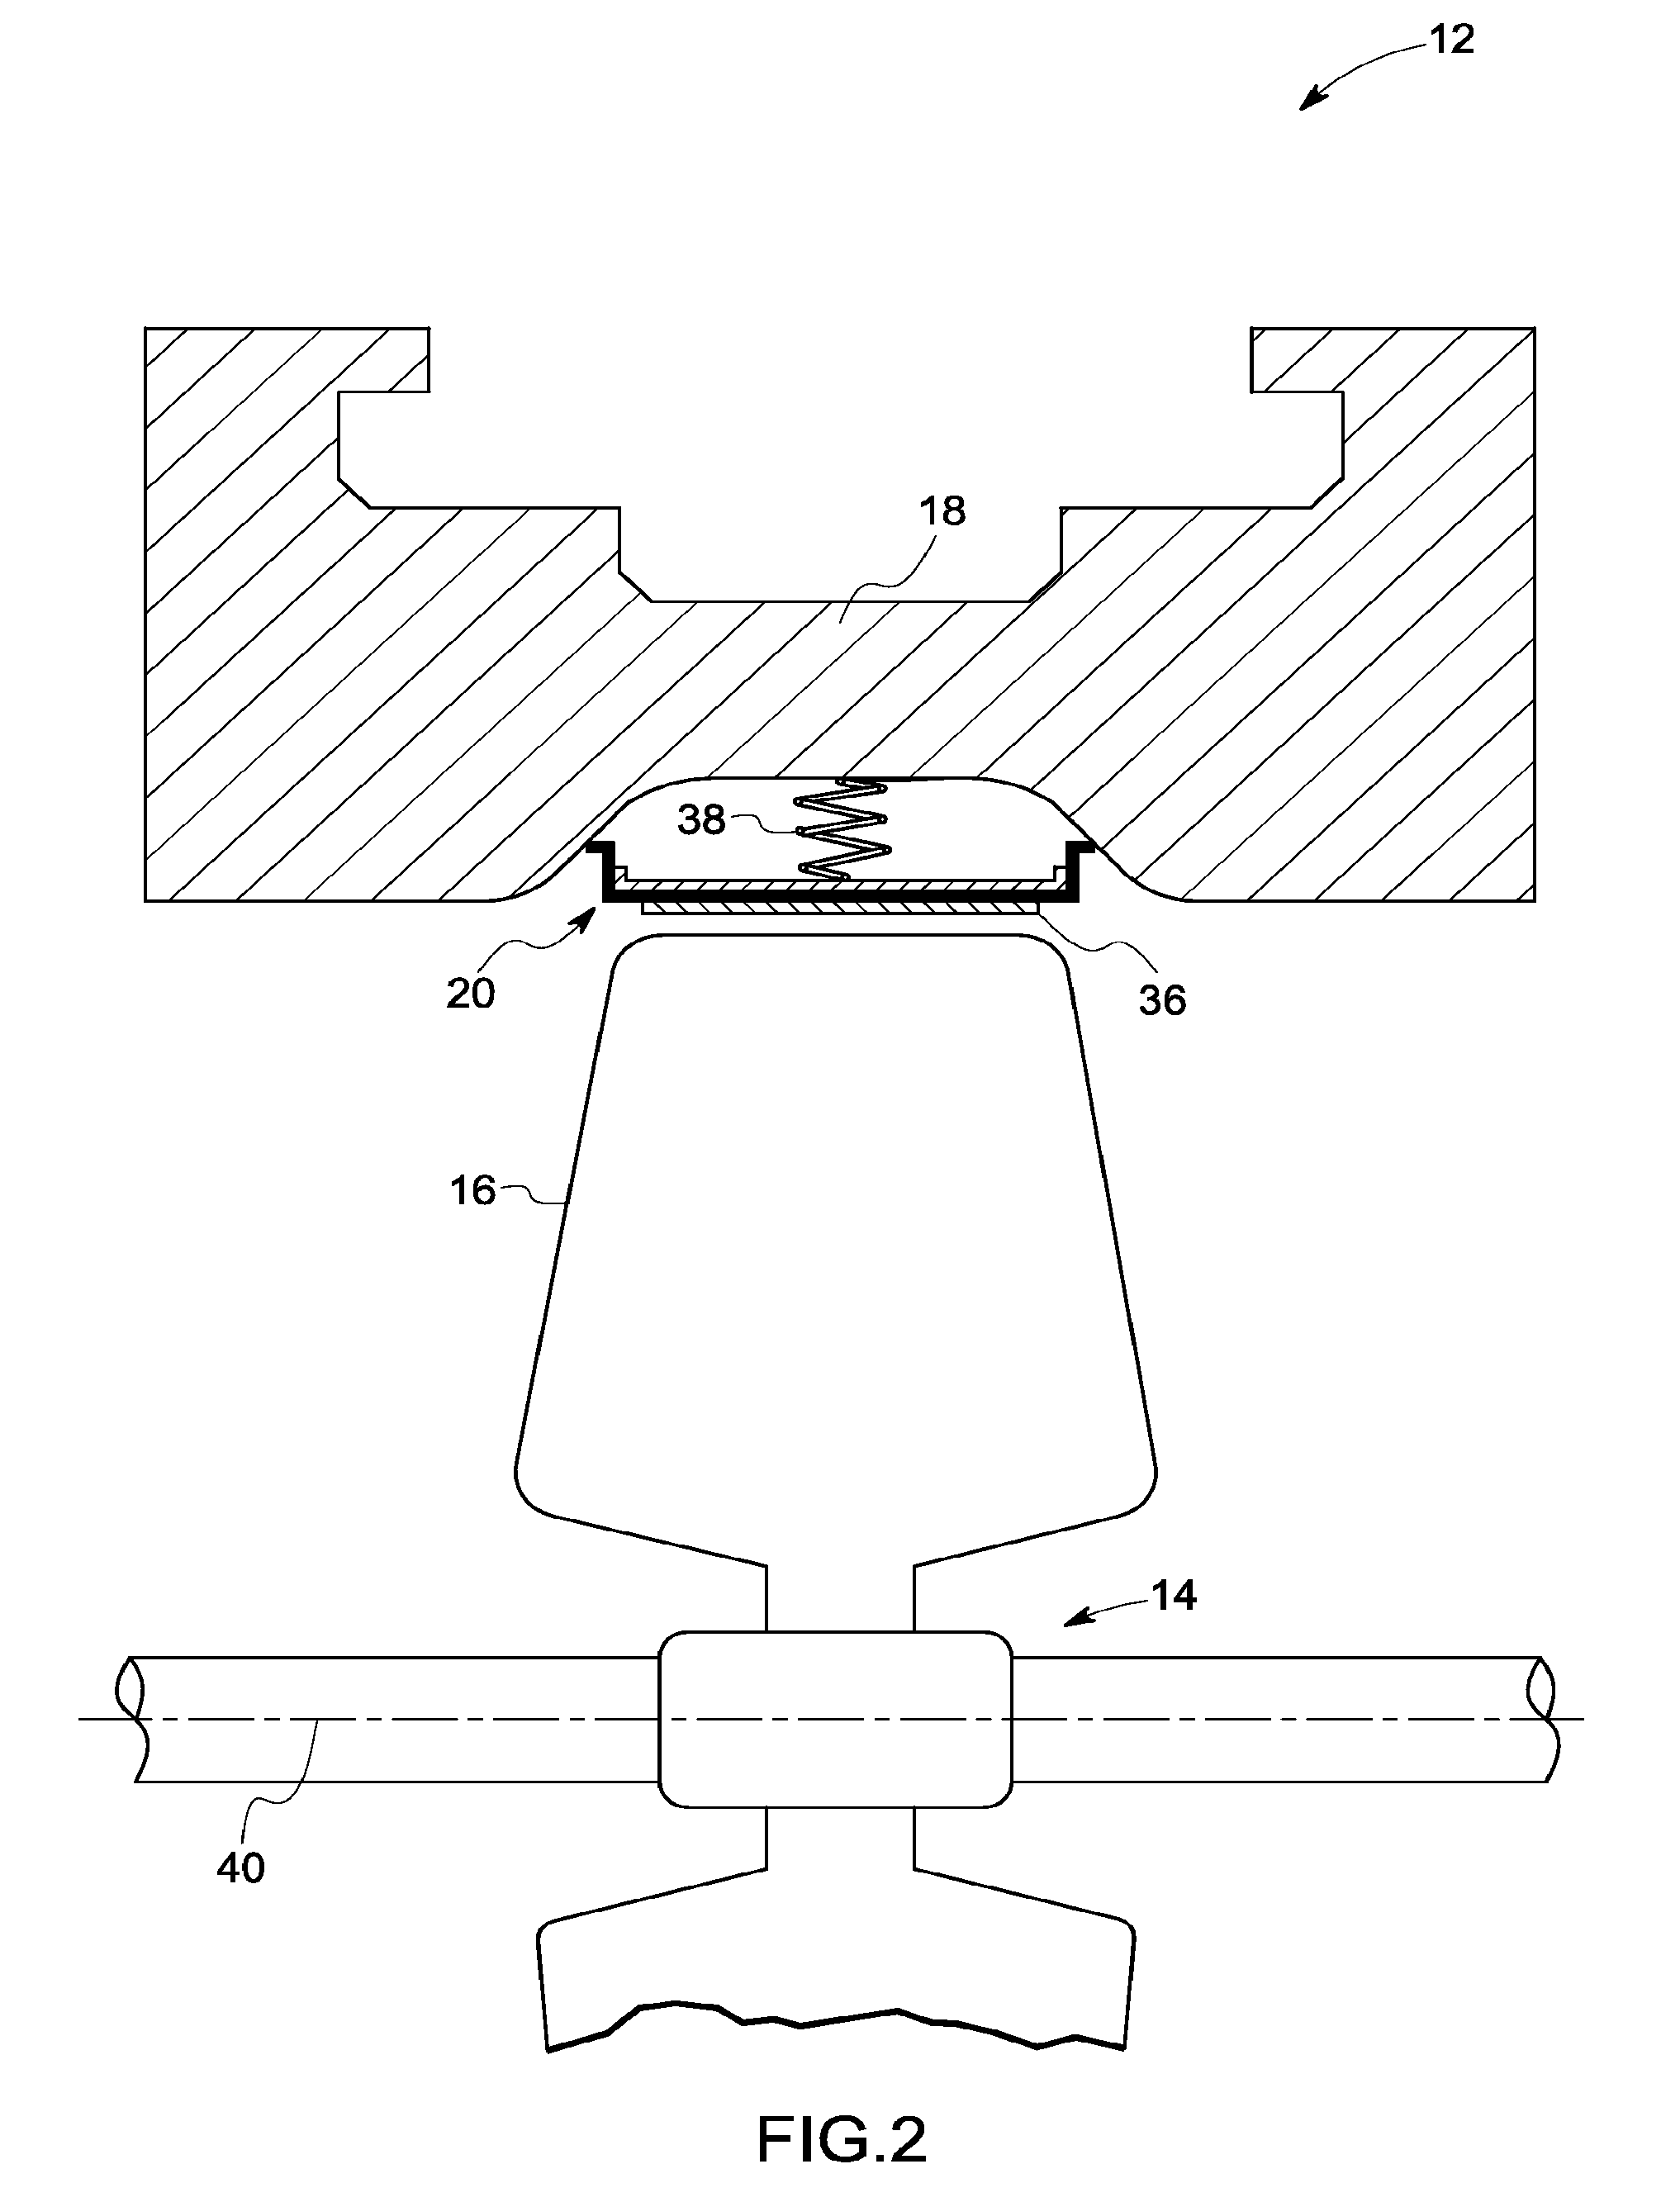 Sealing device and method for turbomachinery